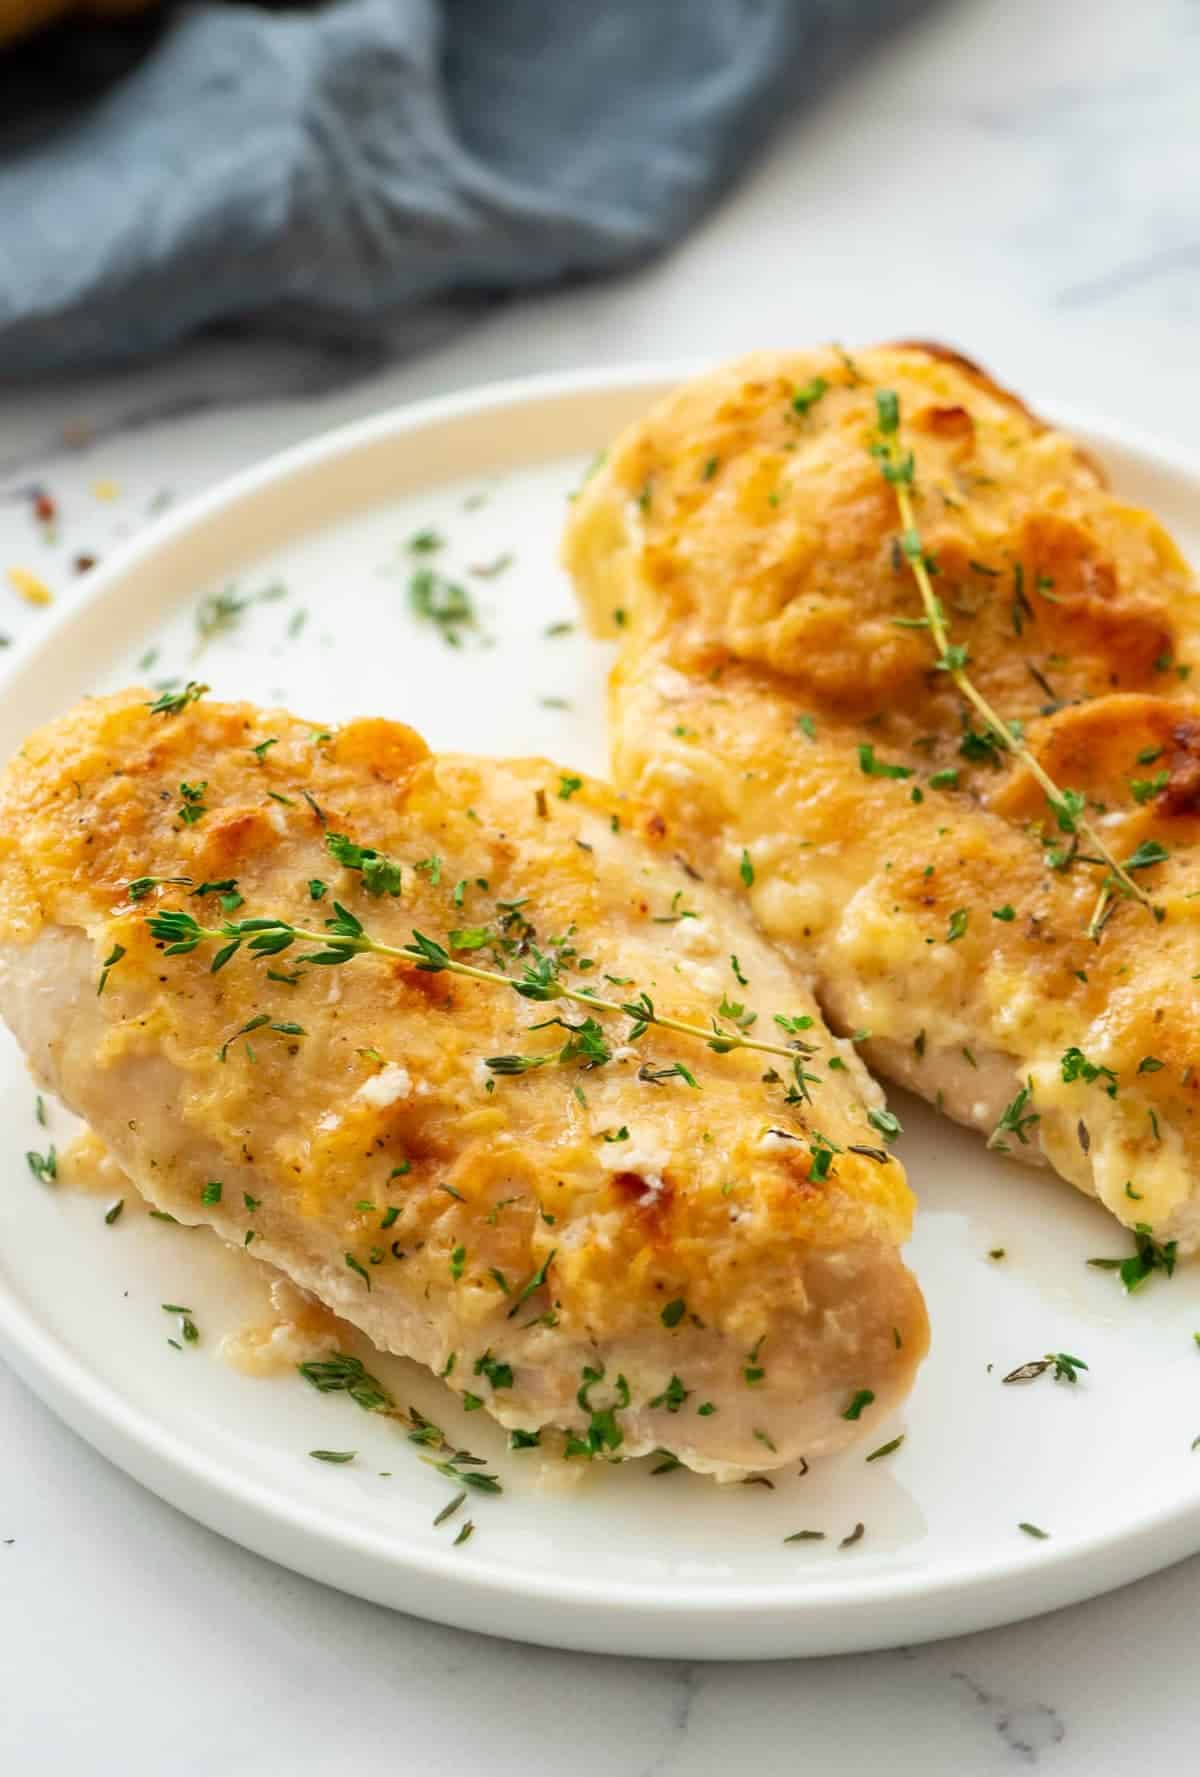 Two butter baked chicken breasts served on a white plate